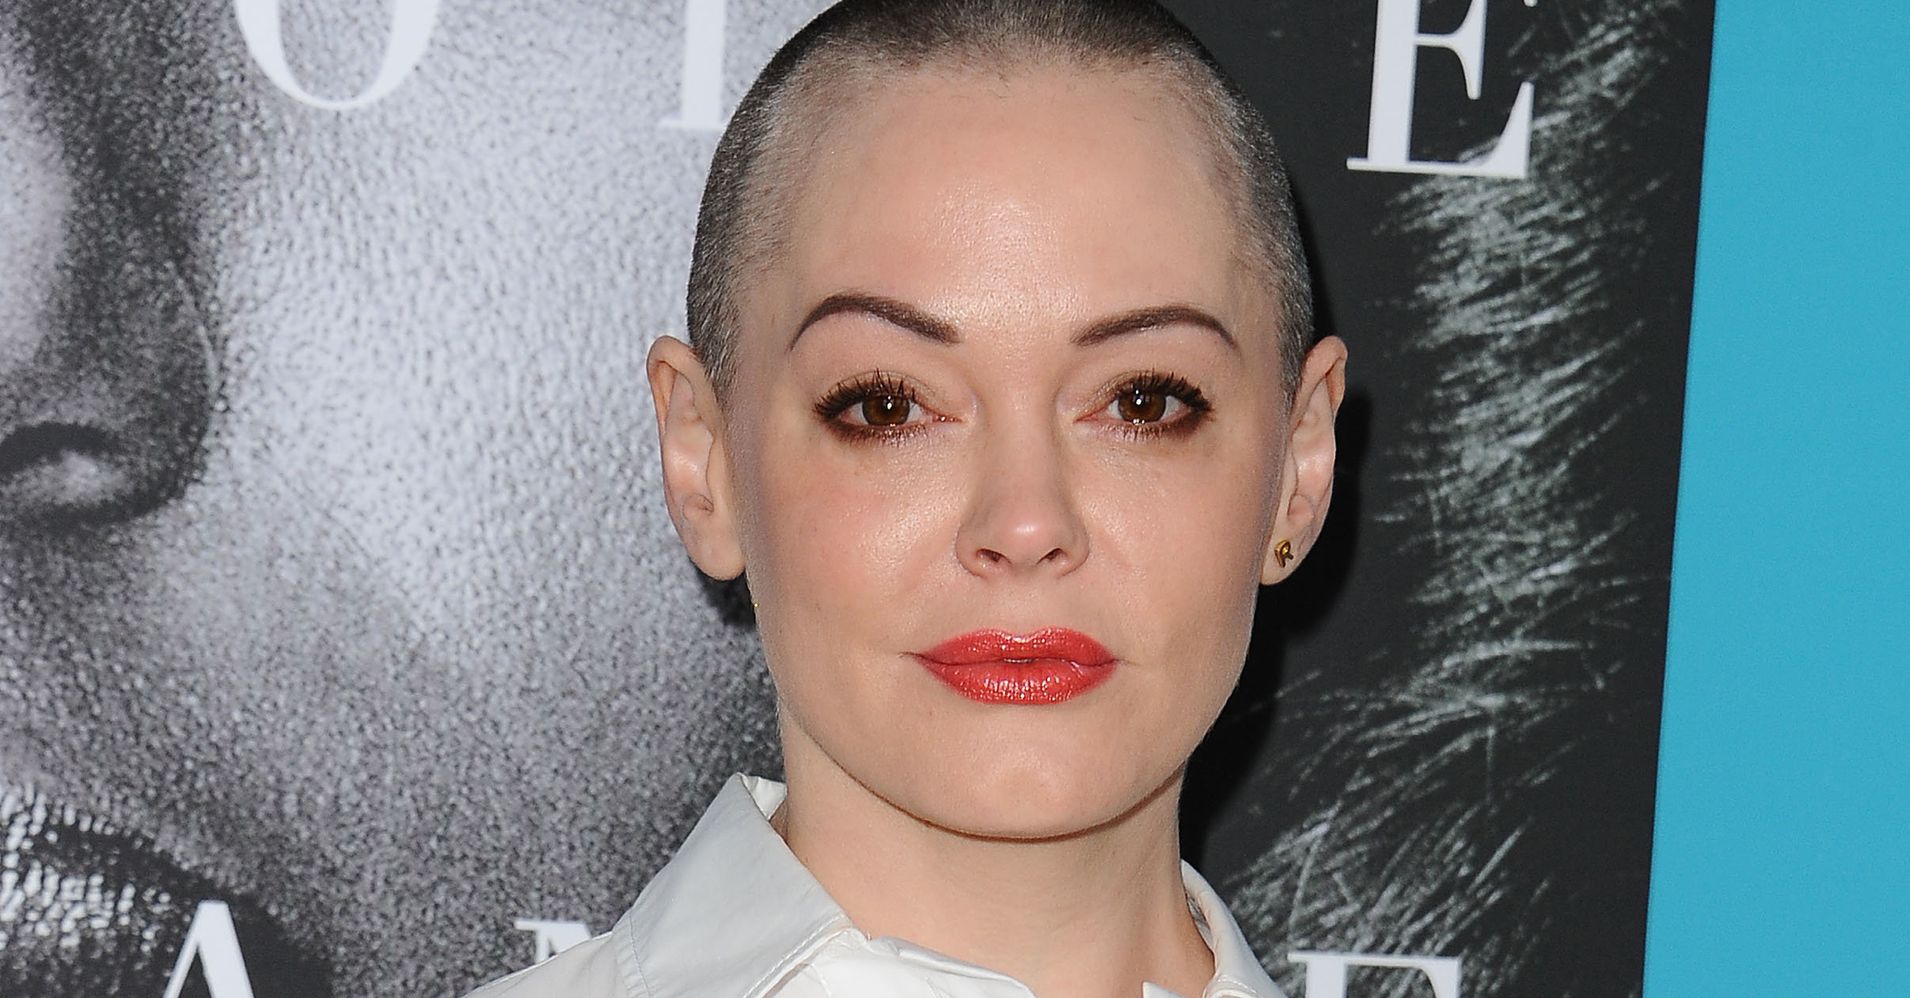 Rose McGowan Returns To Twitter After Suspension | HuffPost